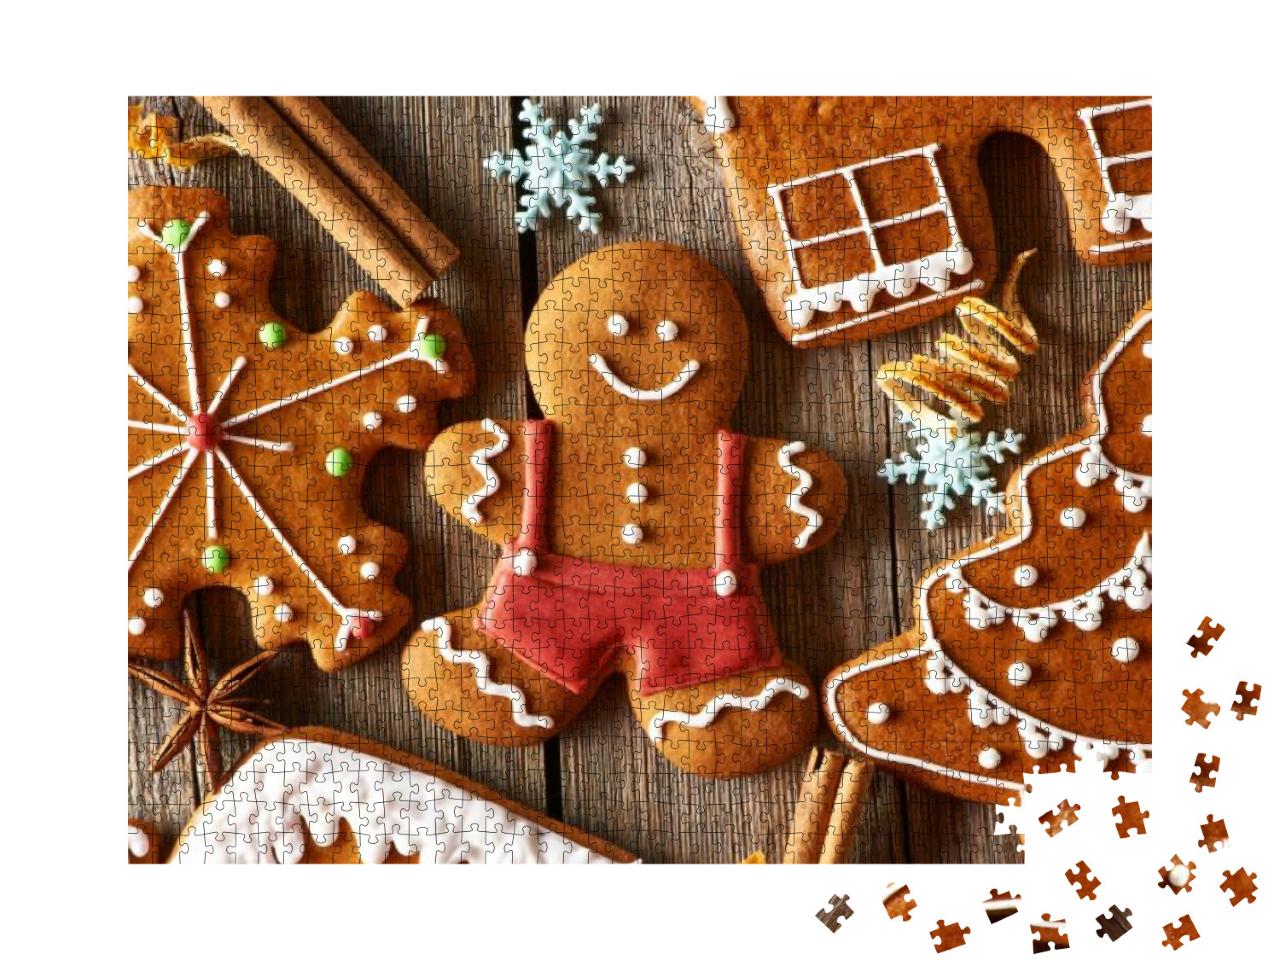 Christmas Homemade Gingerbread Cookies on Wooden Table... Jigsaw Puzzle with 1000 pieces